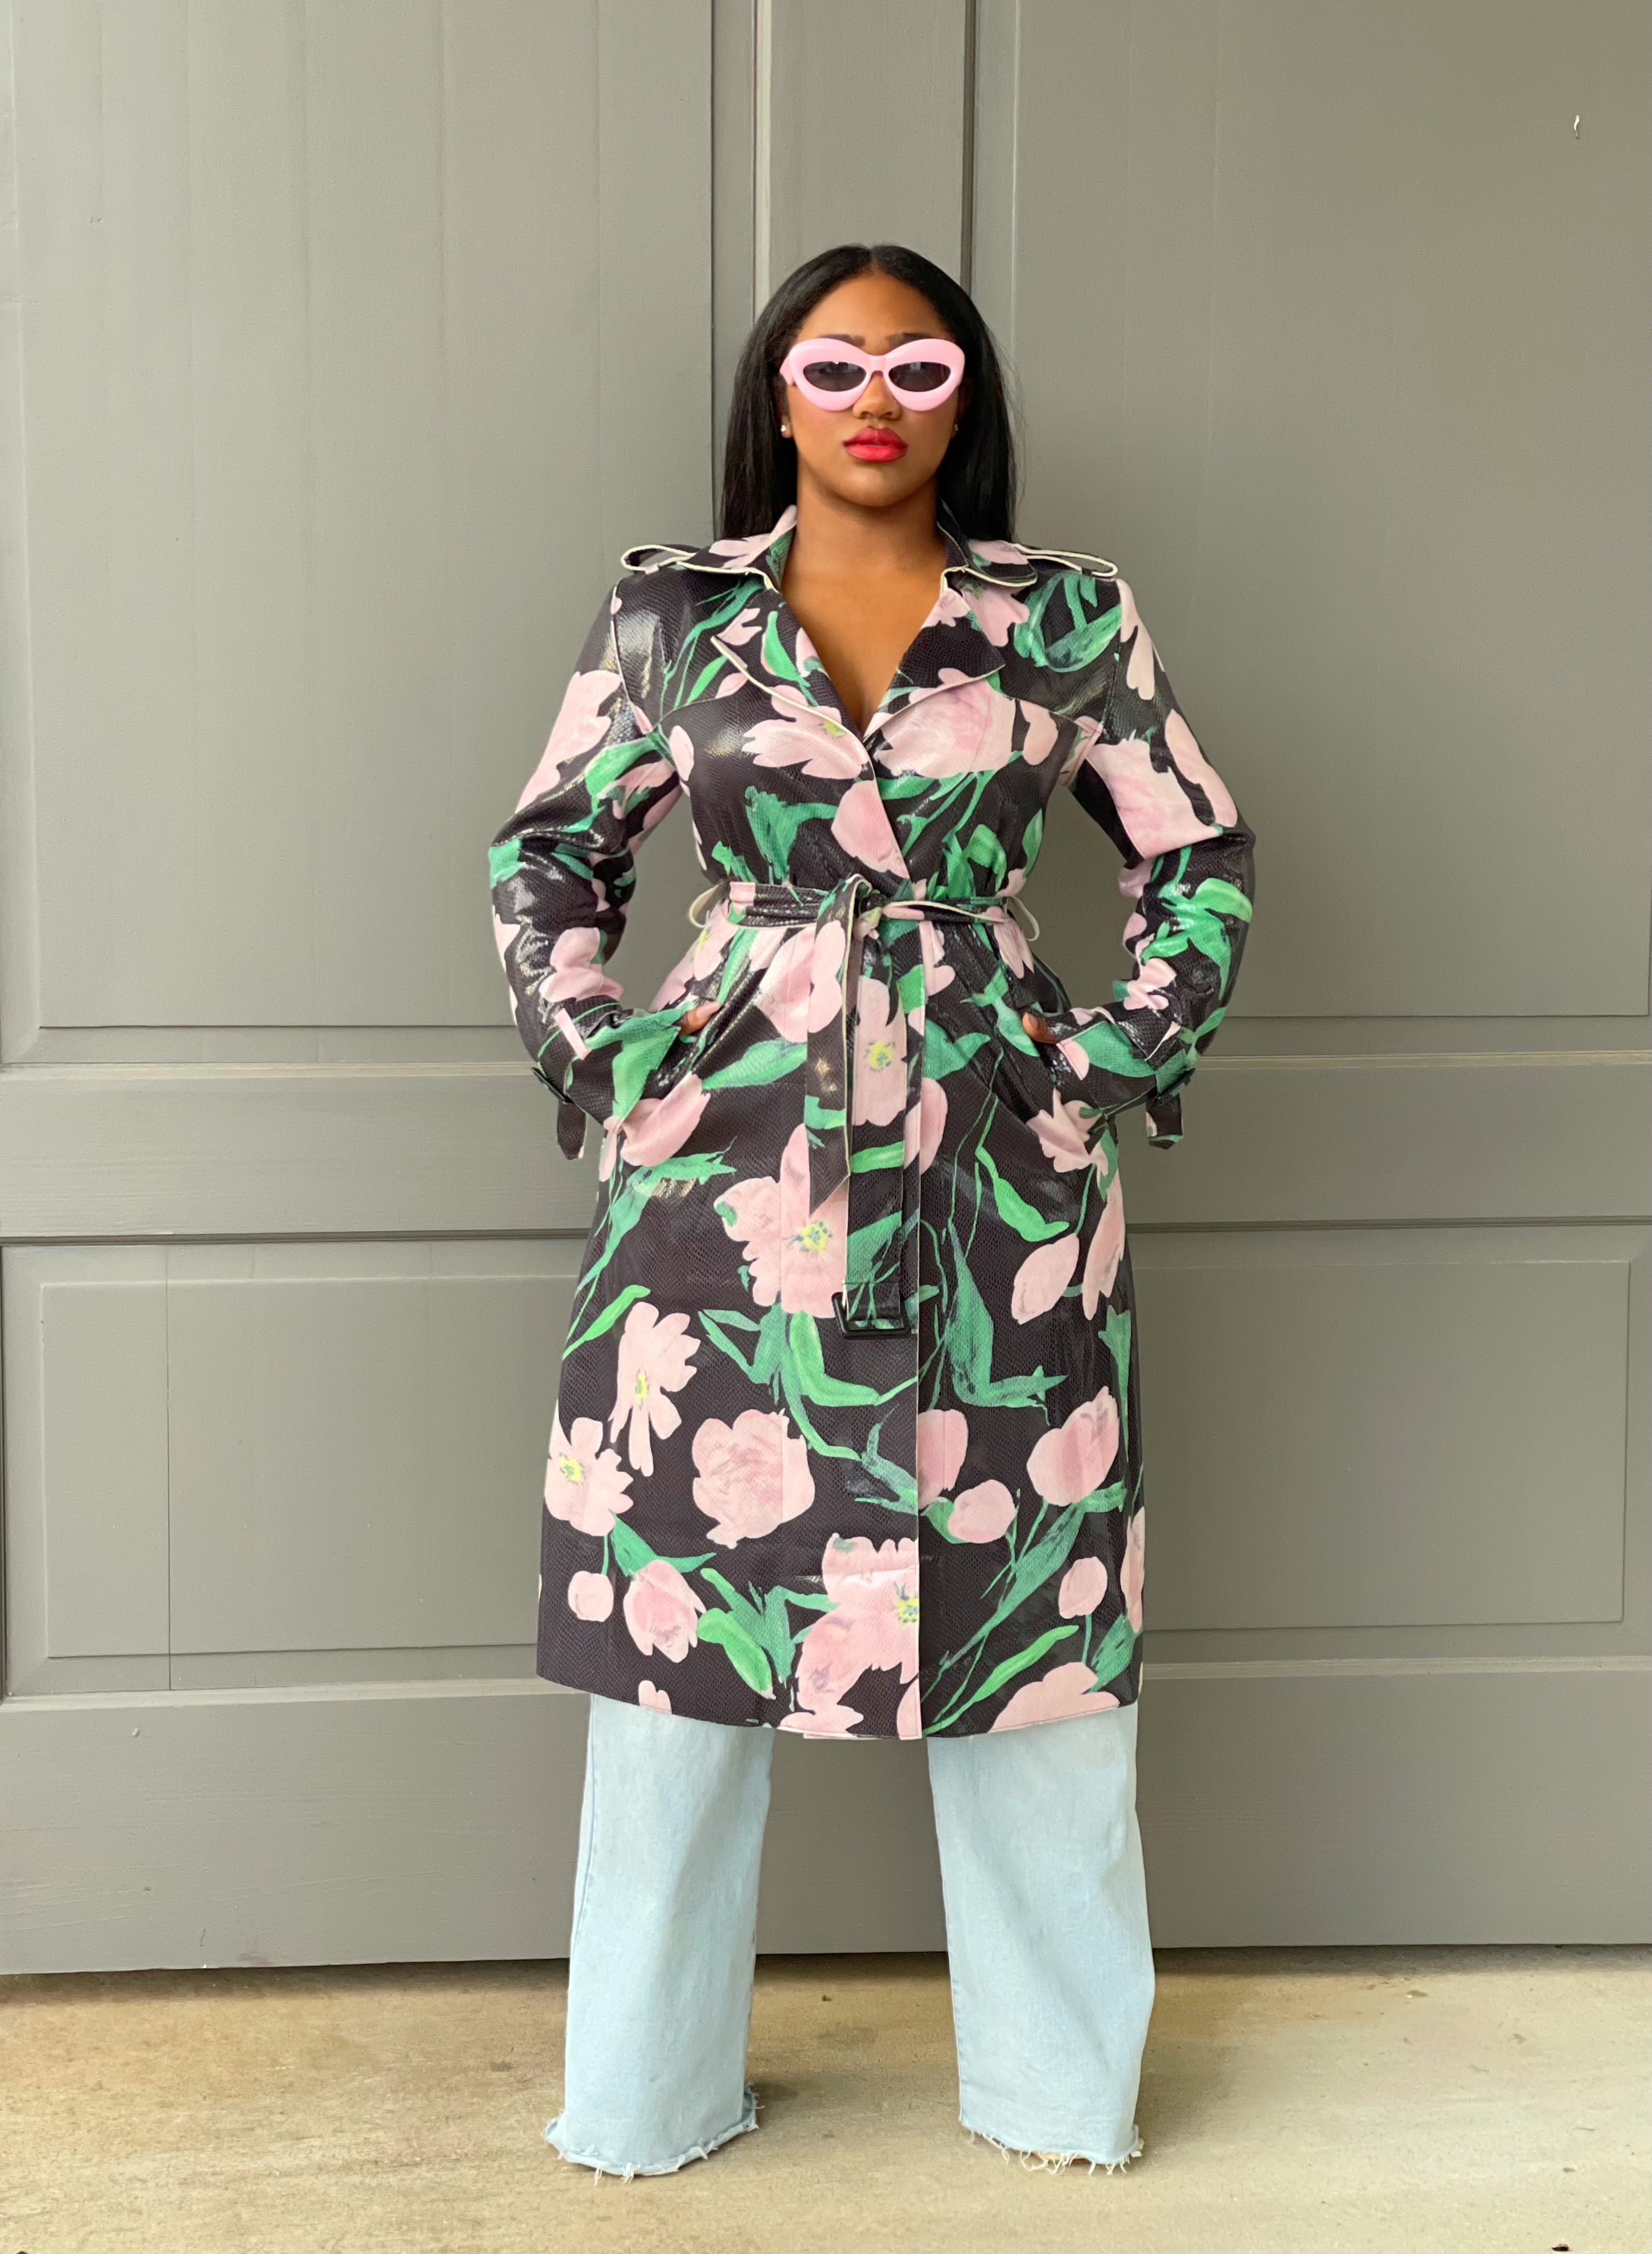 GOLDxTEAL faux leather pink and green floral trench coat. Gorgeous floral print faux leather trench coat.